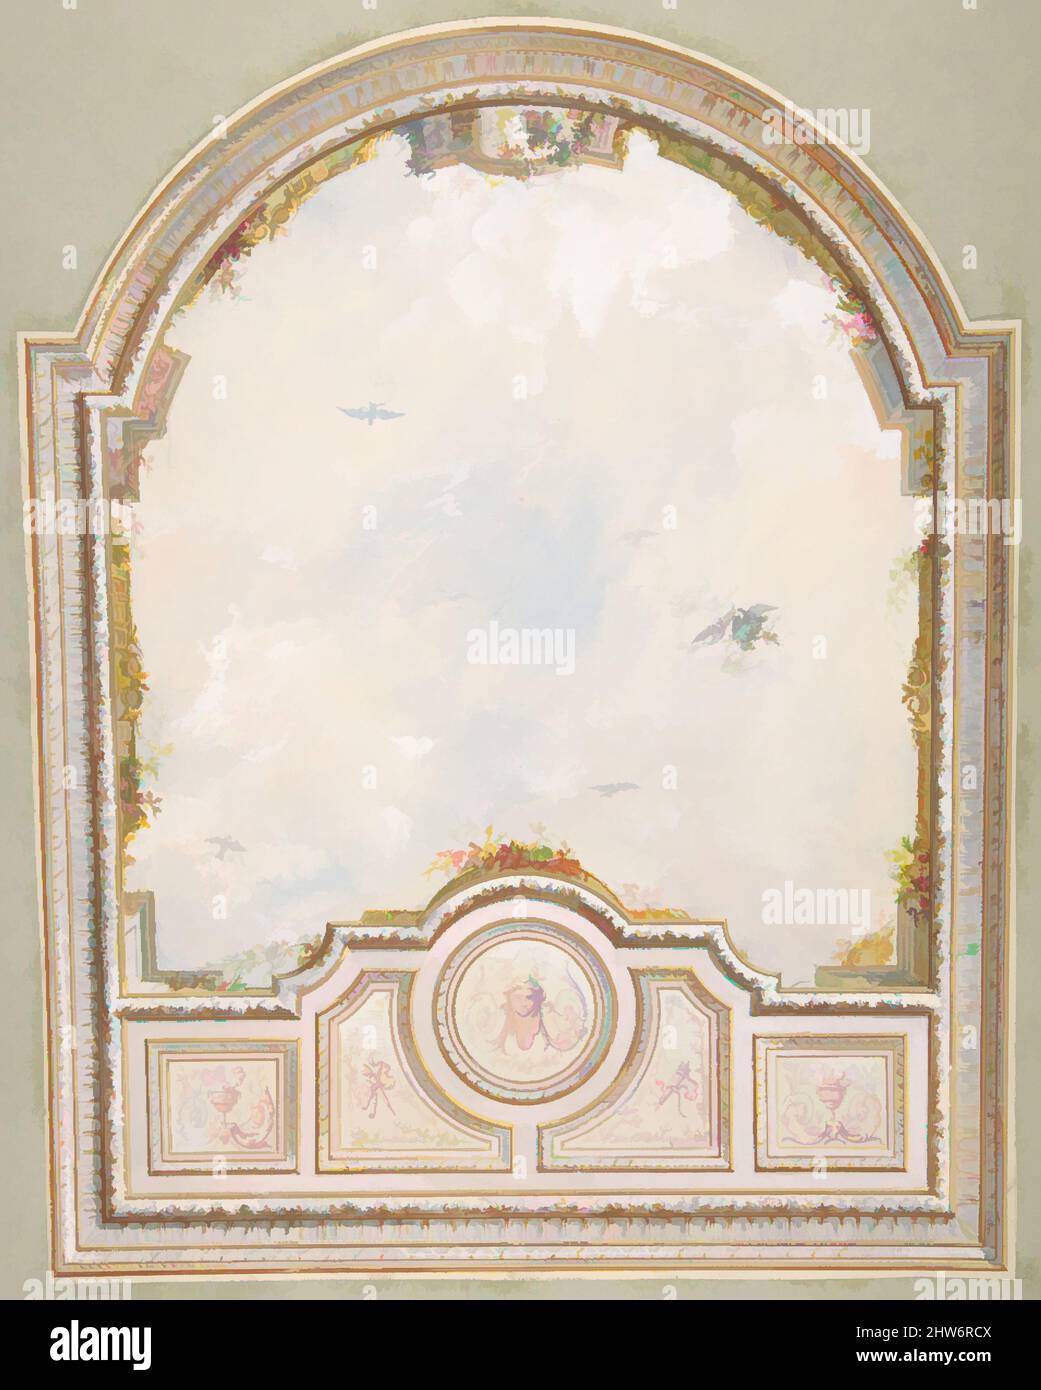 Art inspired by Deign for a ceiling a a trompe l'oeil sky, second half 19th century, Graphite, pen and black ink, gouache, and watercolor, Overall: 19 3/4 x 13 1/2 in. (50.1 x 34.3 cm), Drawings, Jules-Edmond-Charles Lachaise (French, died 1897), Eugène-Pierre Gourdet (French, born, Classic works modernized by Artotop with a splash of modernity. Shapes, color and value, eye-catching visual impact on art. Emotions through freedom of artworks in a contemporary way. A timeless message pursuing a wildly creative new direction. Artists turning to the digital medium and creating the Artotop NFT Stock Photo